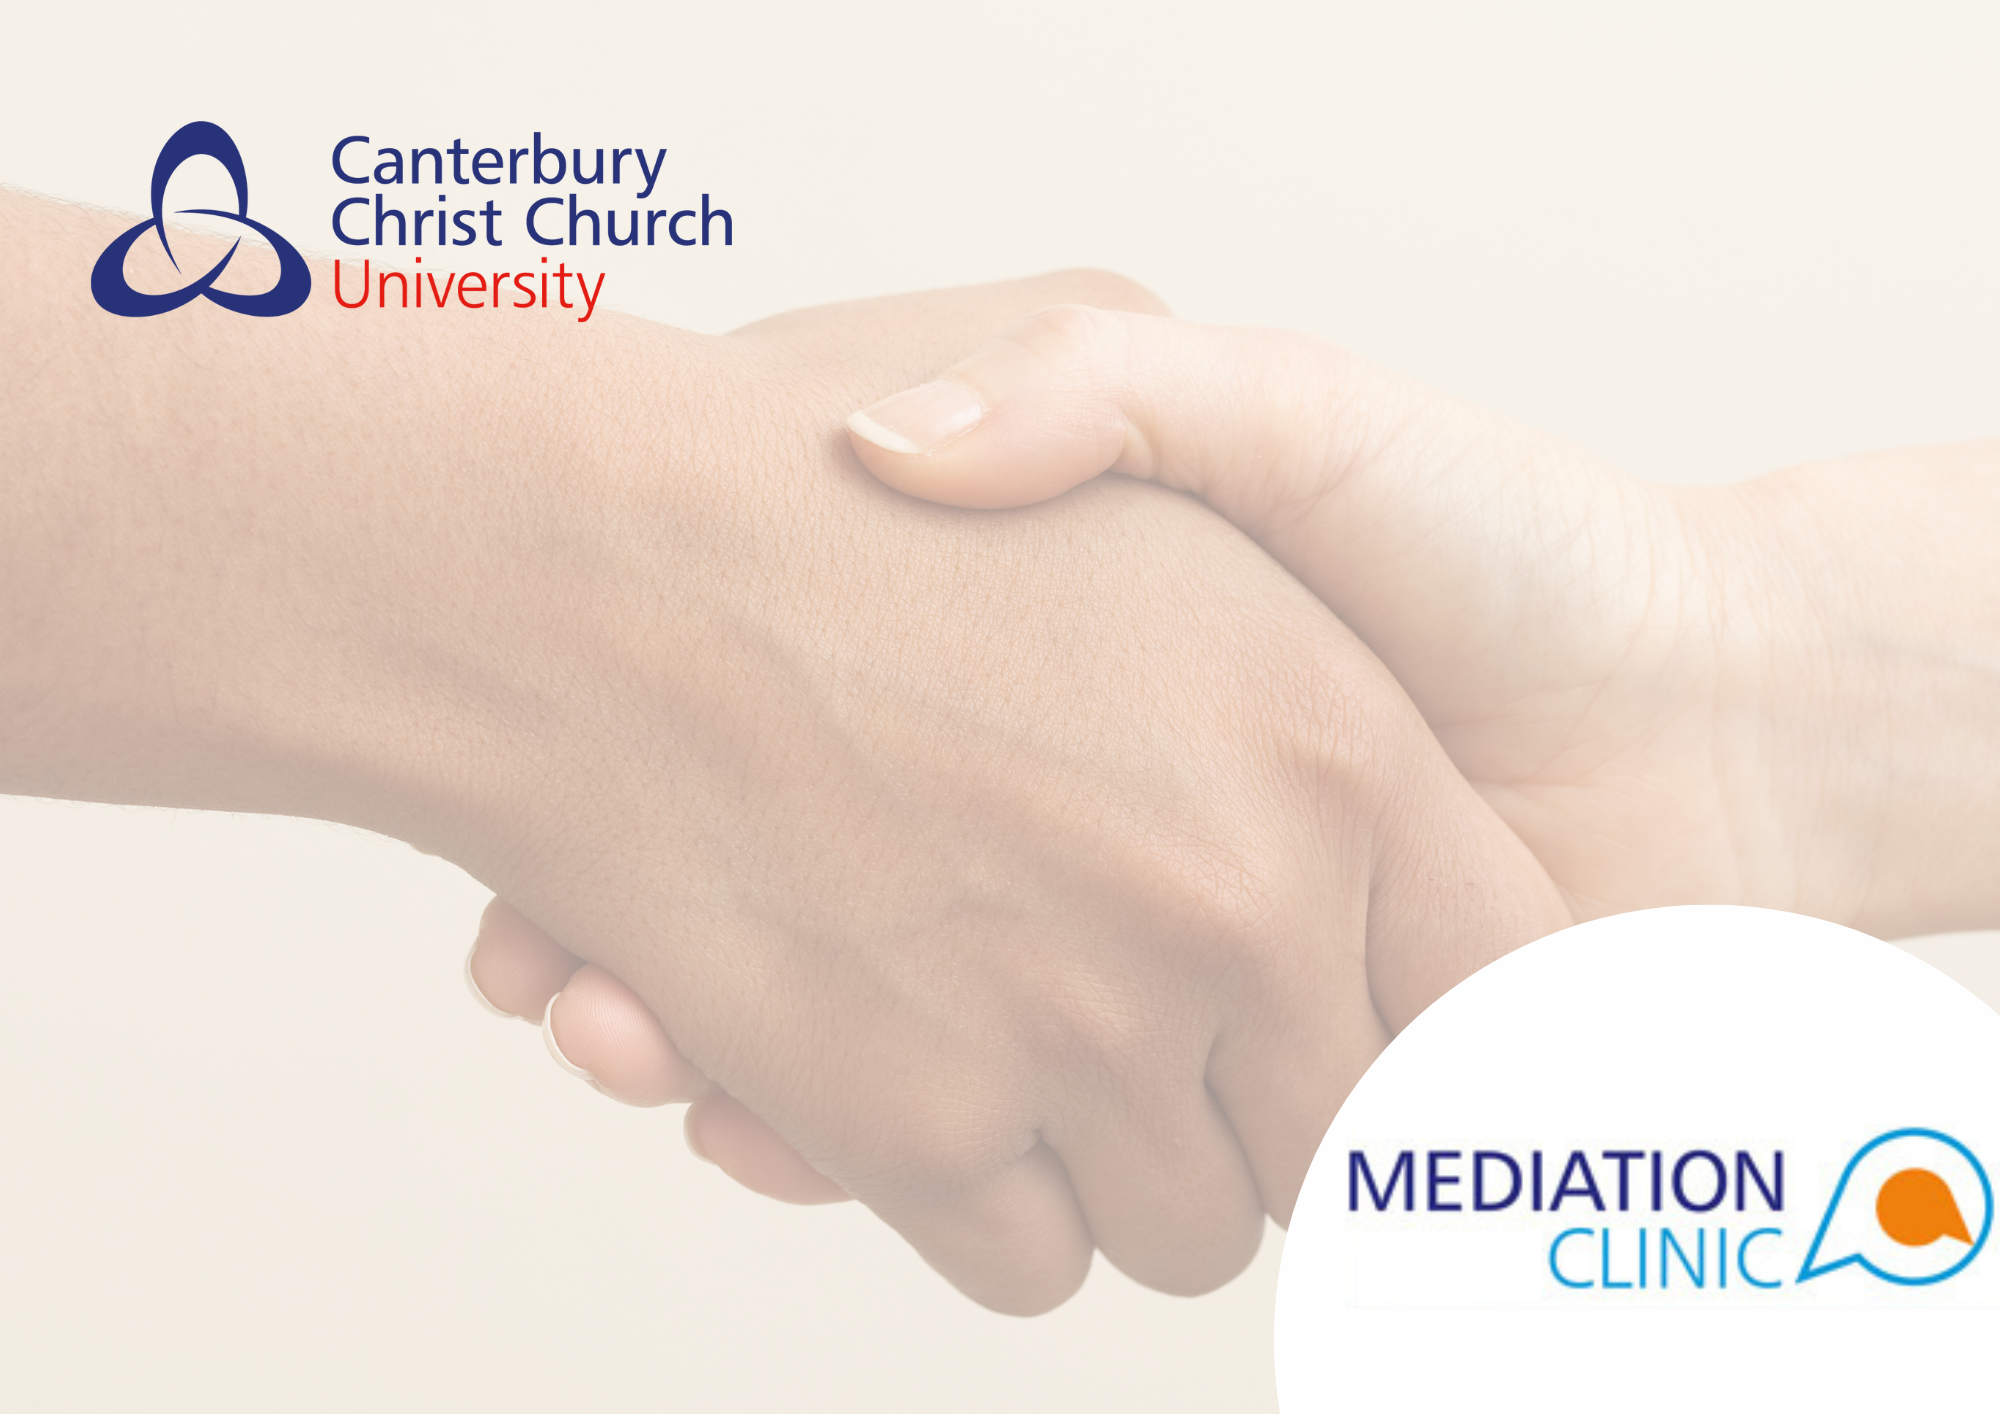 The Mediation Clinic